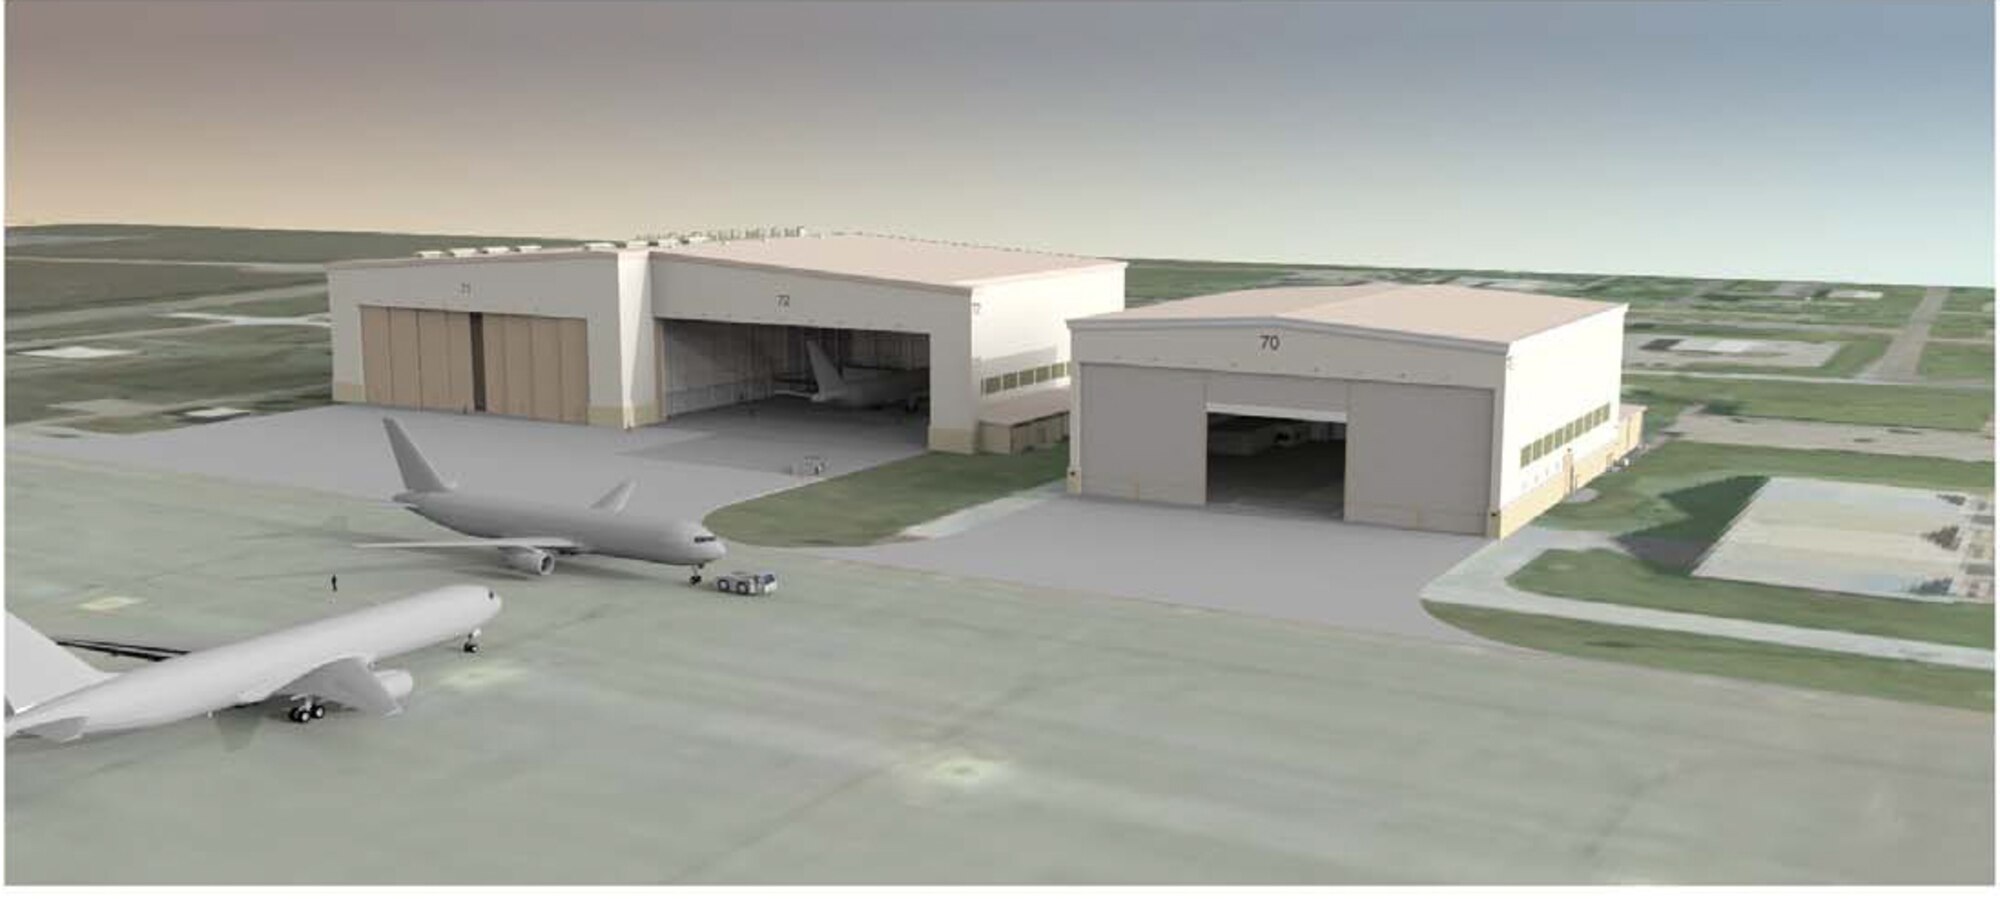 Several projects will break ground at McConnell Air Force Base, Kan., in the upcoming weeks, including construction of one- and two-bay hangars like those depicted in this rendering. The construction is part of the beddown effort for the Air Force’s new fleet of KC-46A aerial tankers, expected to arrive in 2016. (Courtesy graphic) 
